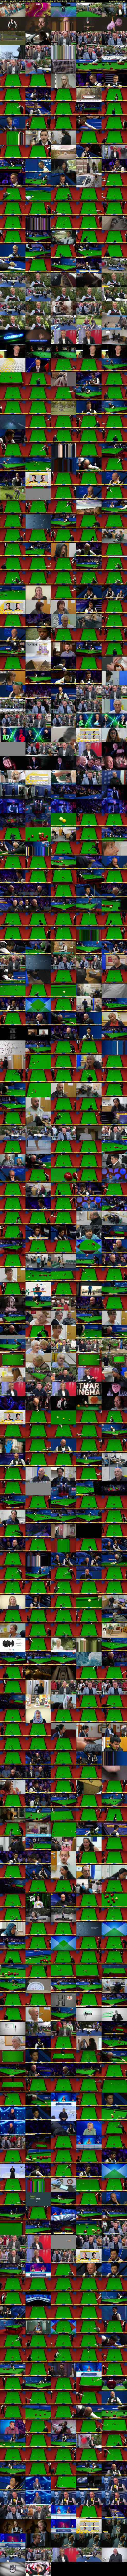 Snooker: World Championship (BBC TWO) Tuesday 19 April 2022 13:00 - 18:00